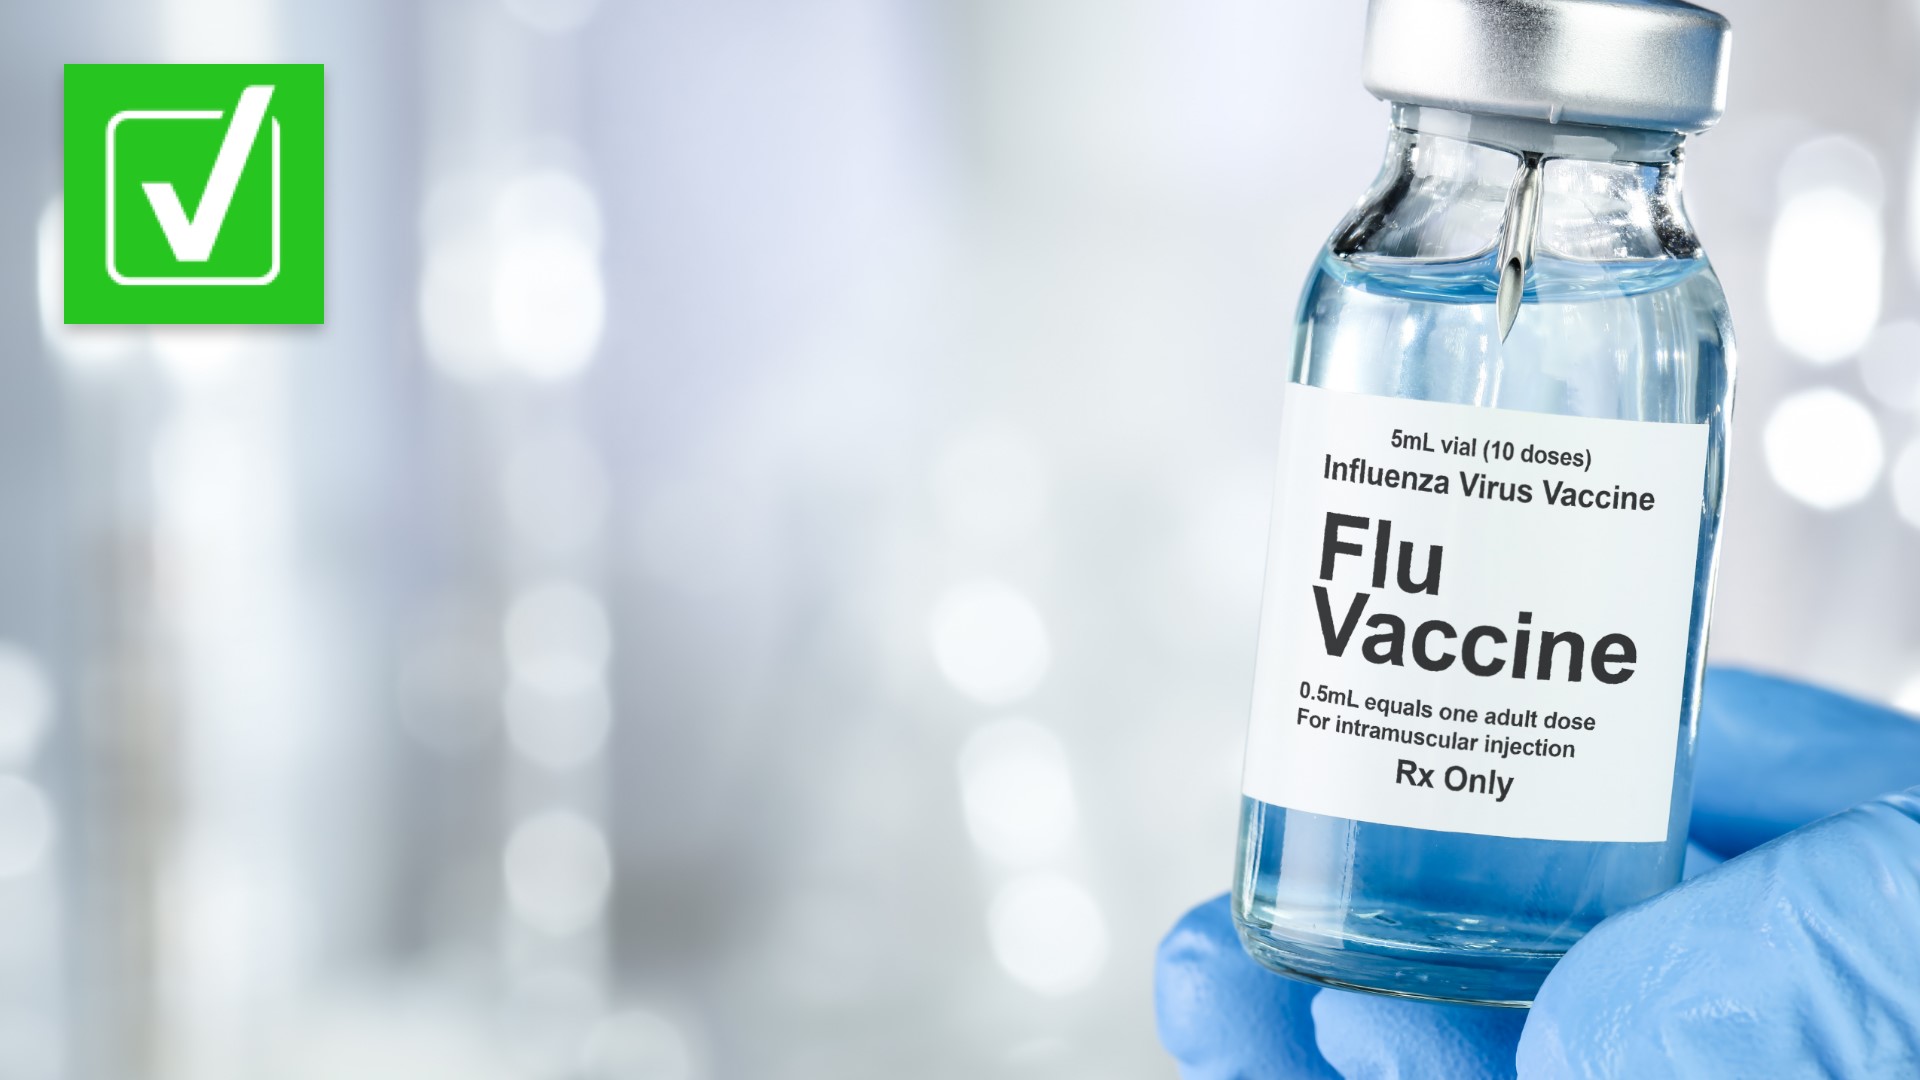 Influenza is among seven vaccines Maine health care workers must get. Our NEWS CENTER Maine VERIFY team confirms the information.